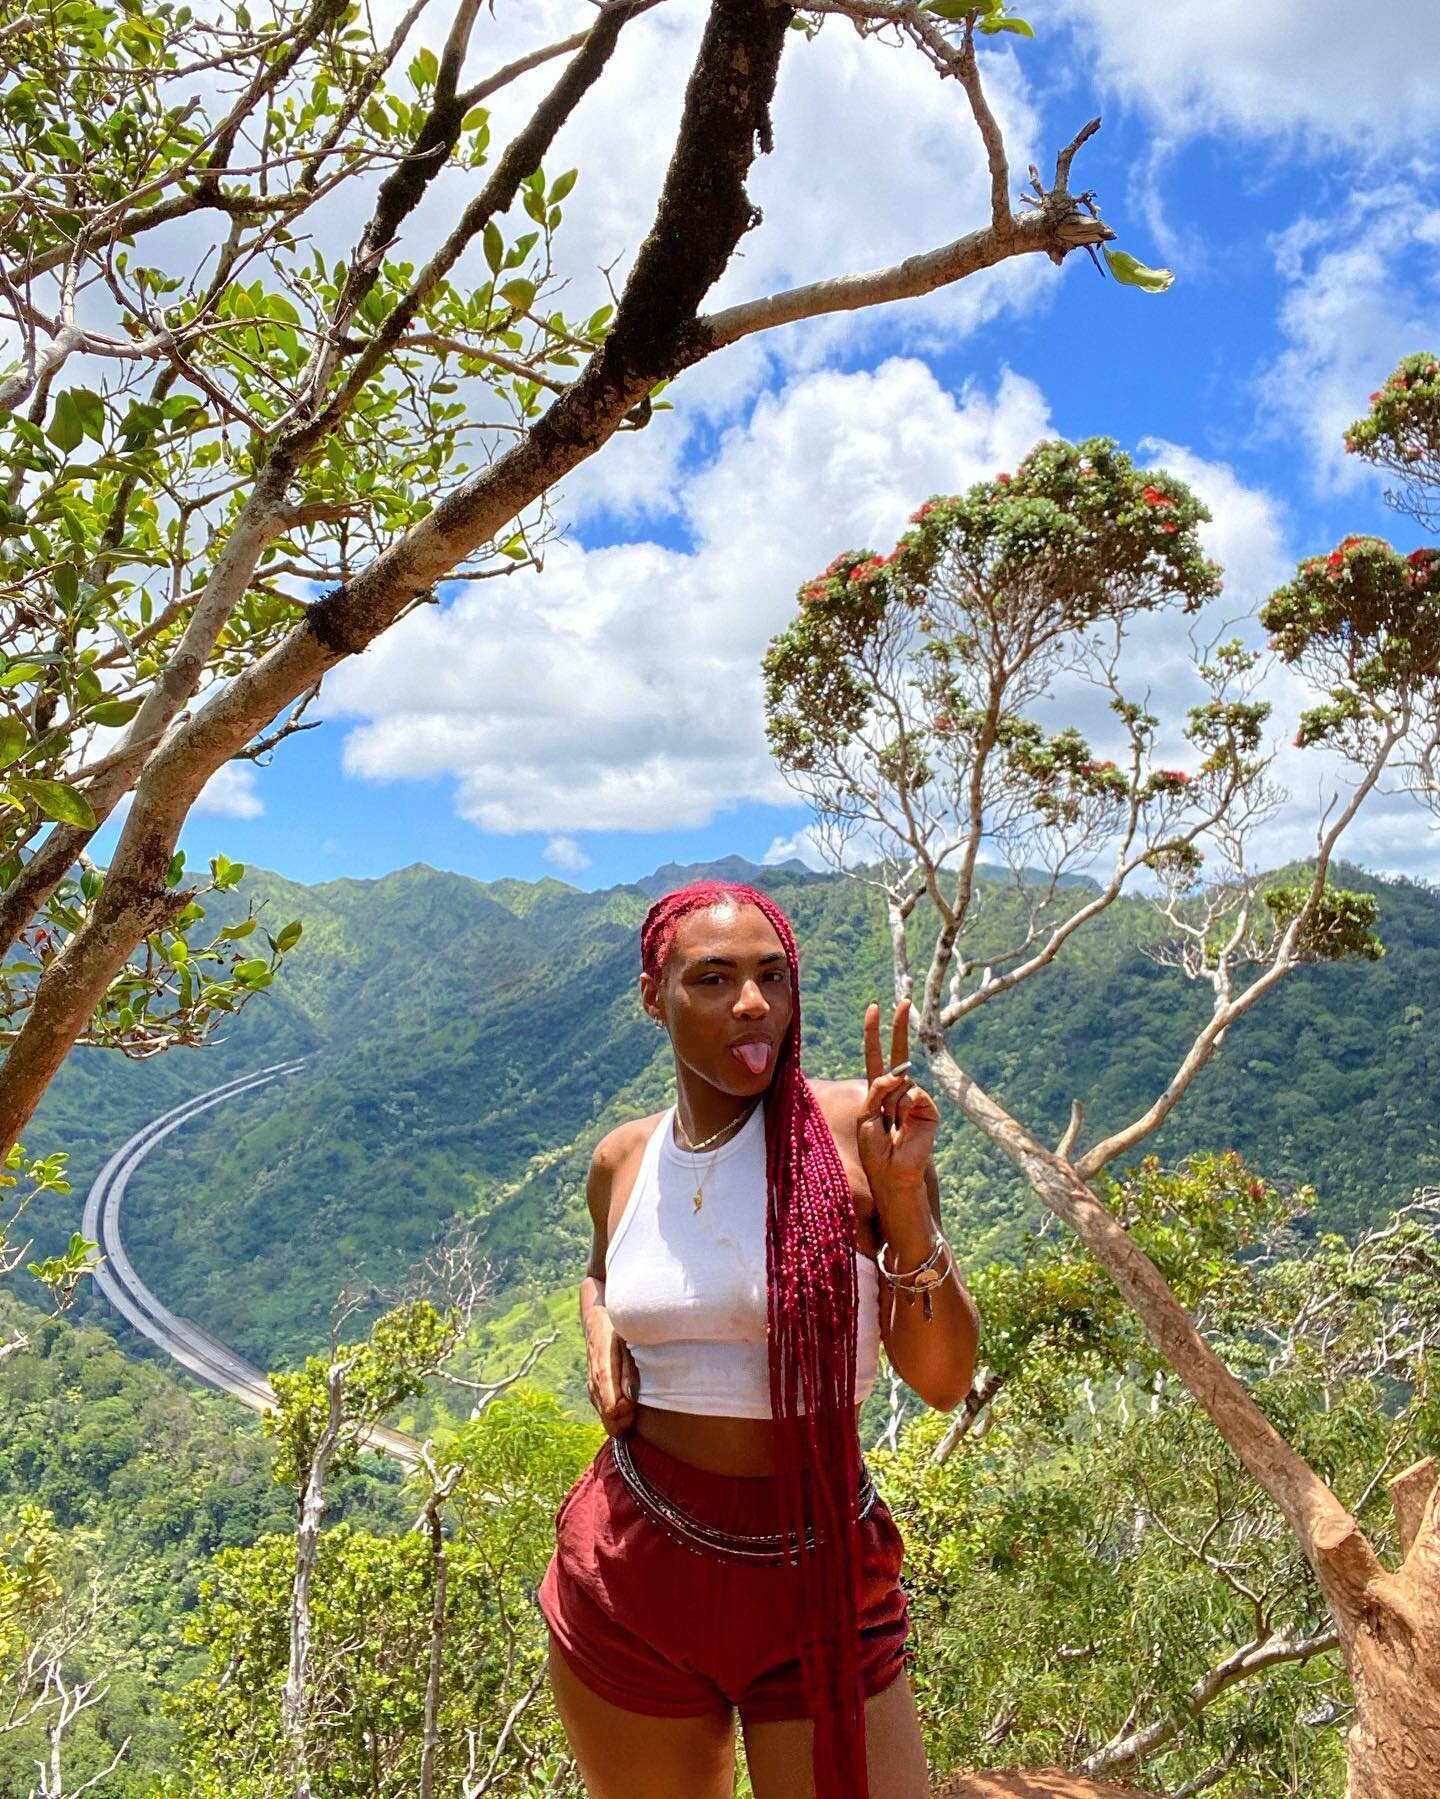 Took some time off to follow my intuition. Ended up way up here. 🥰✨💫☀️
#newyorkbraider
.
.
.
.
.
 #nycbraids #hawaii #blackbeauty #protectivestyles #vacationhair #naturalhairdaily #knotlessboxbraids #travelnoire #tressesofsoleil #jumboknotlessbraid